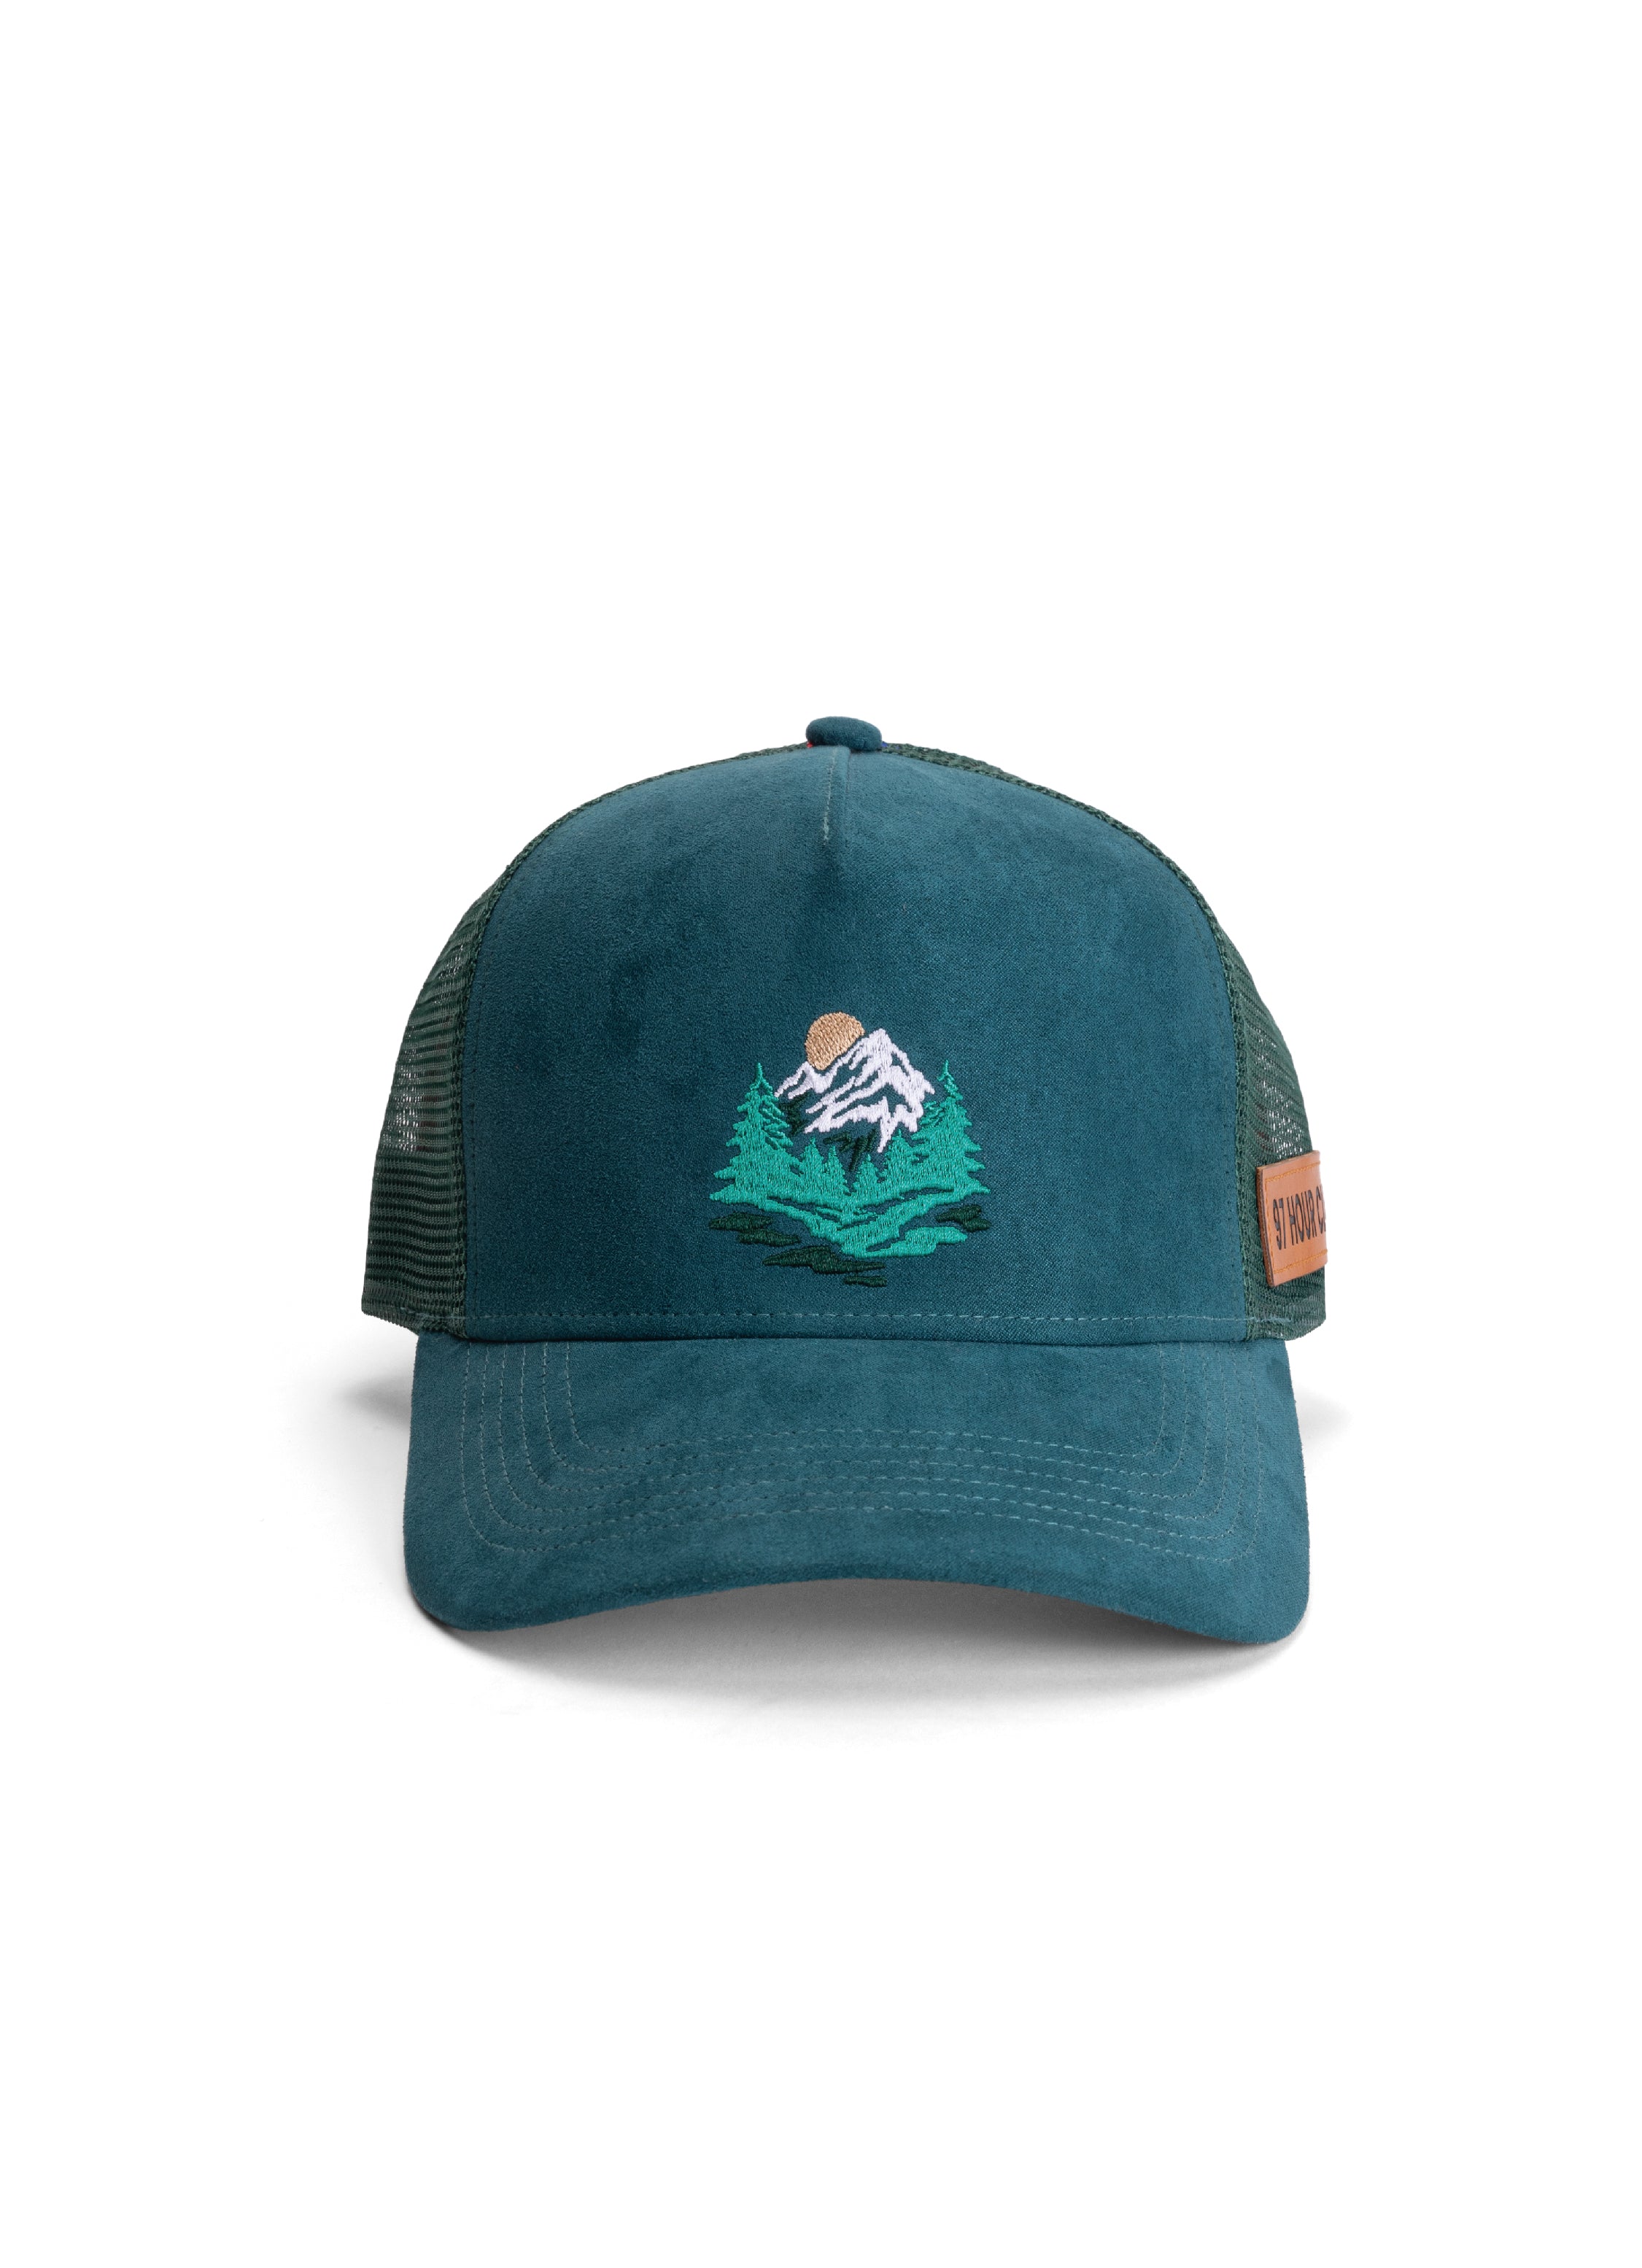 Buy The 97th Hour The The 97th Hour Wilderness Cap Front Look